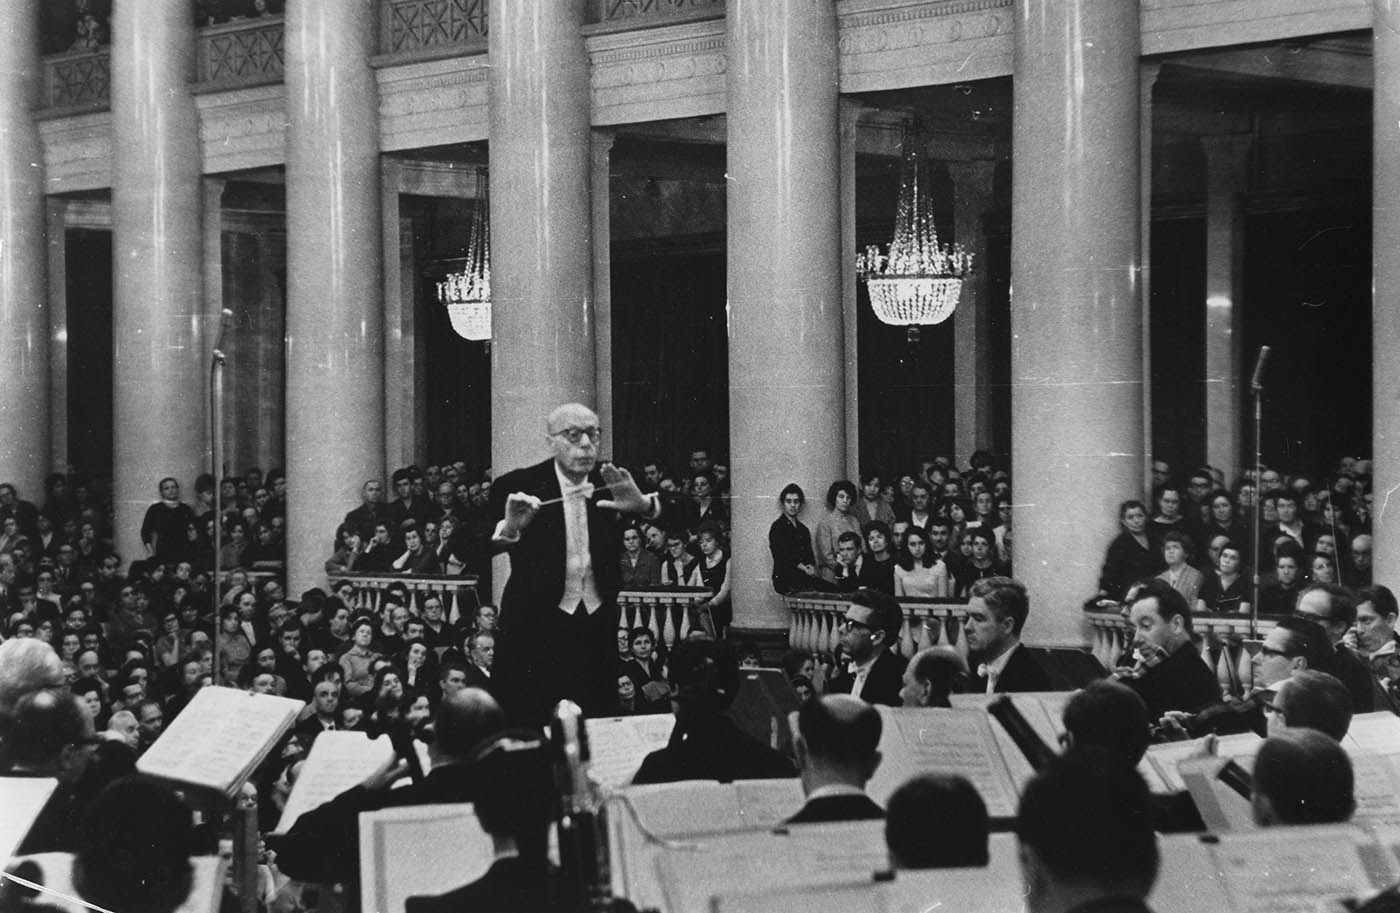 Szell is conducting the Orchestra. A large, attentive audience is seated behind them. Prominent chandeliers hang above the audience.  